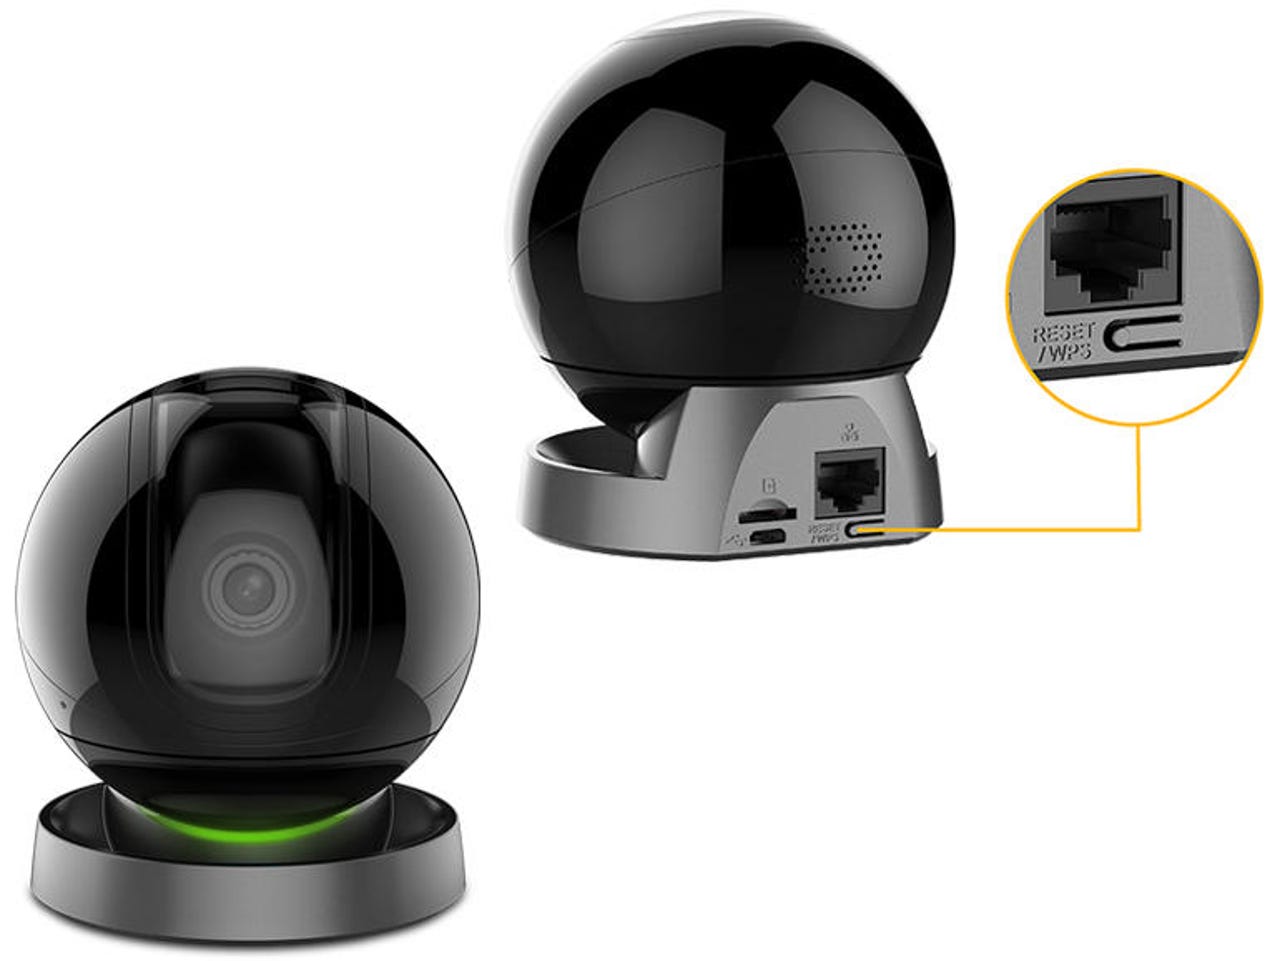 Imou Ranger IQ, hands on: Good-value security camera features, lost in  translation